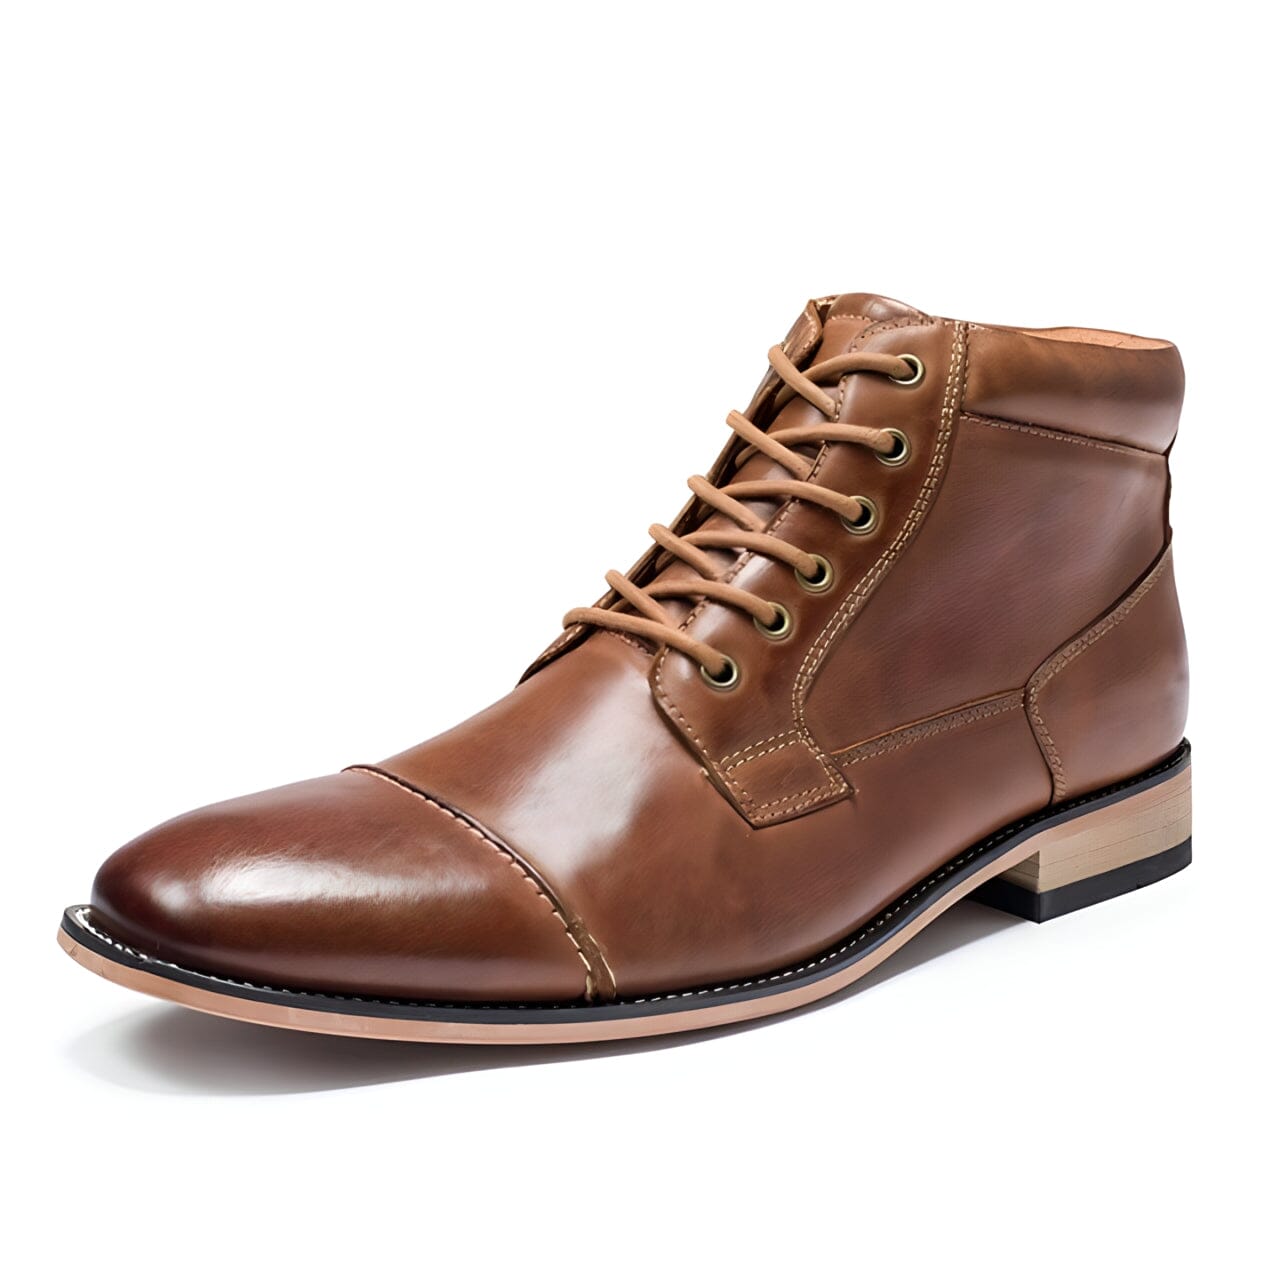 The Carlton Oxford Ankle Boots - Brown Well Worn EU 44 / US 11 